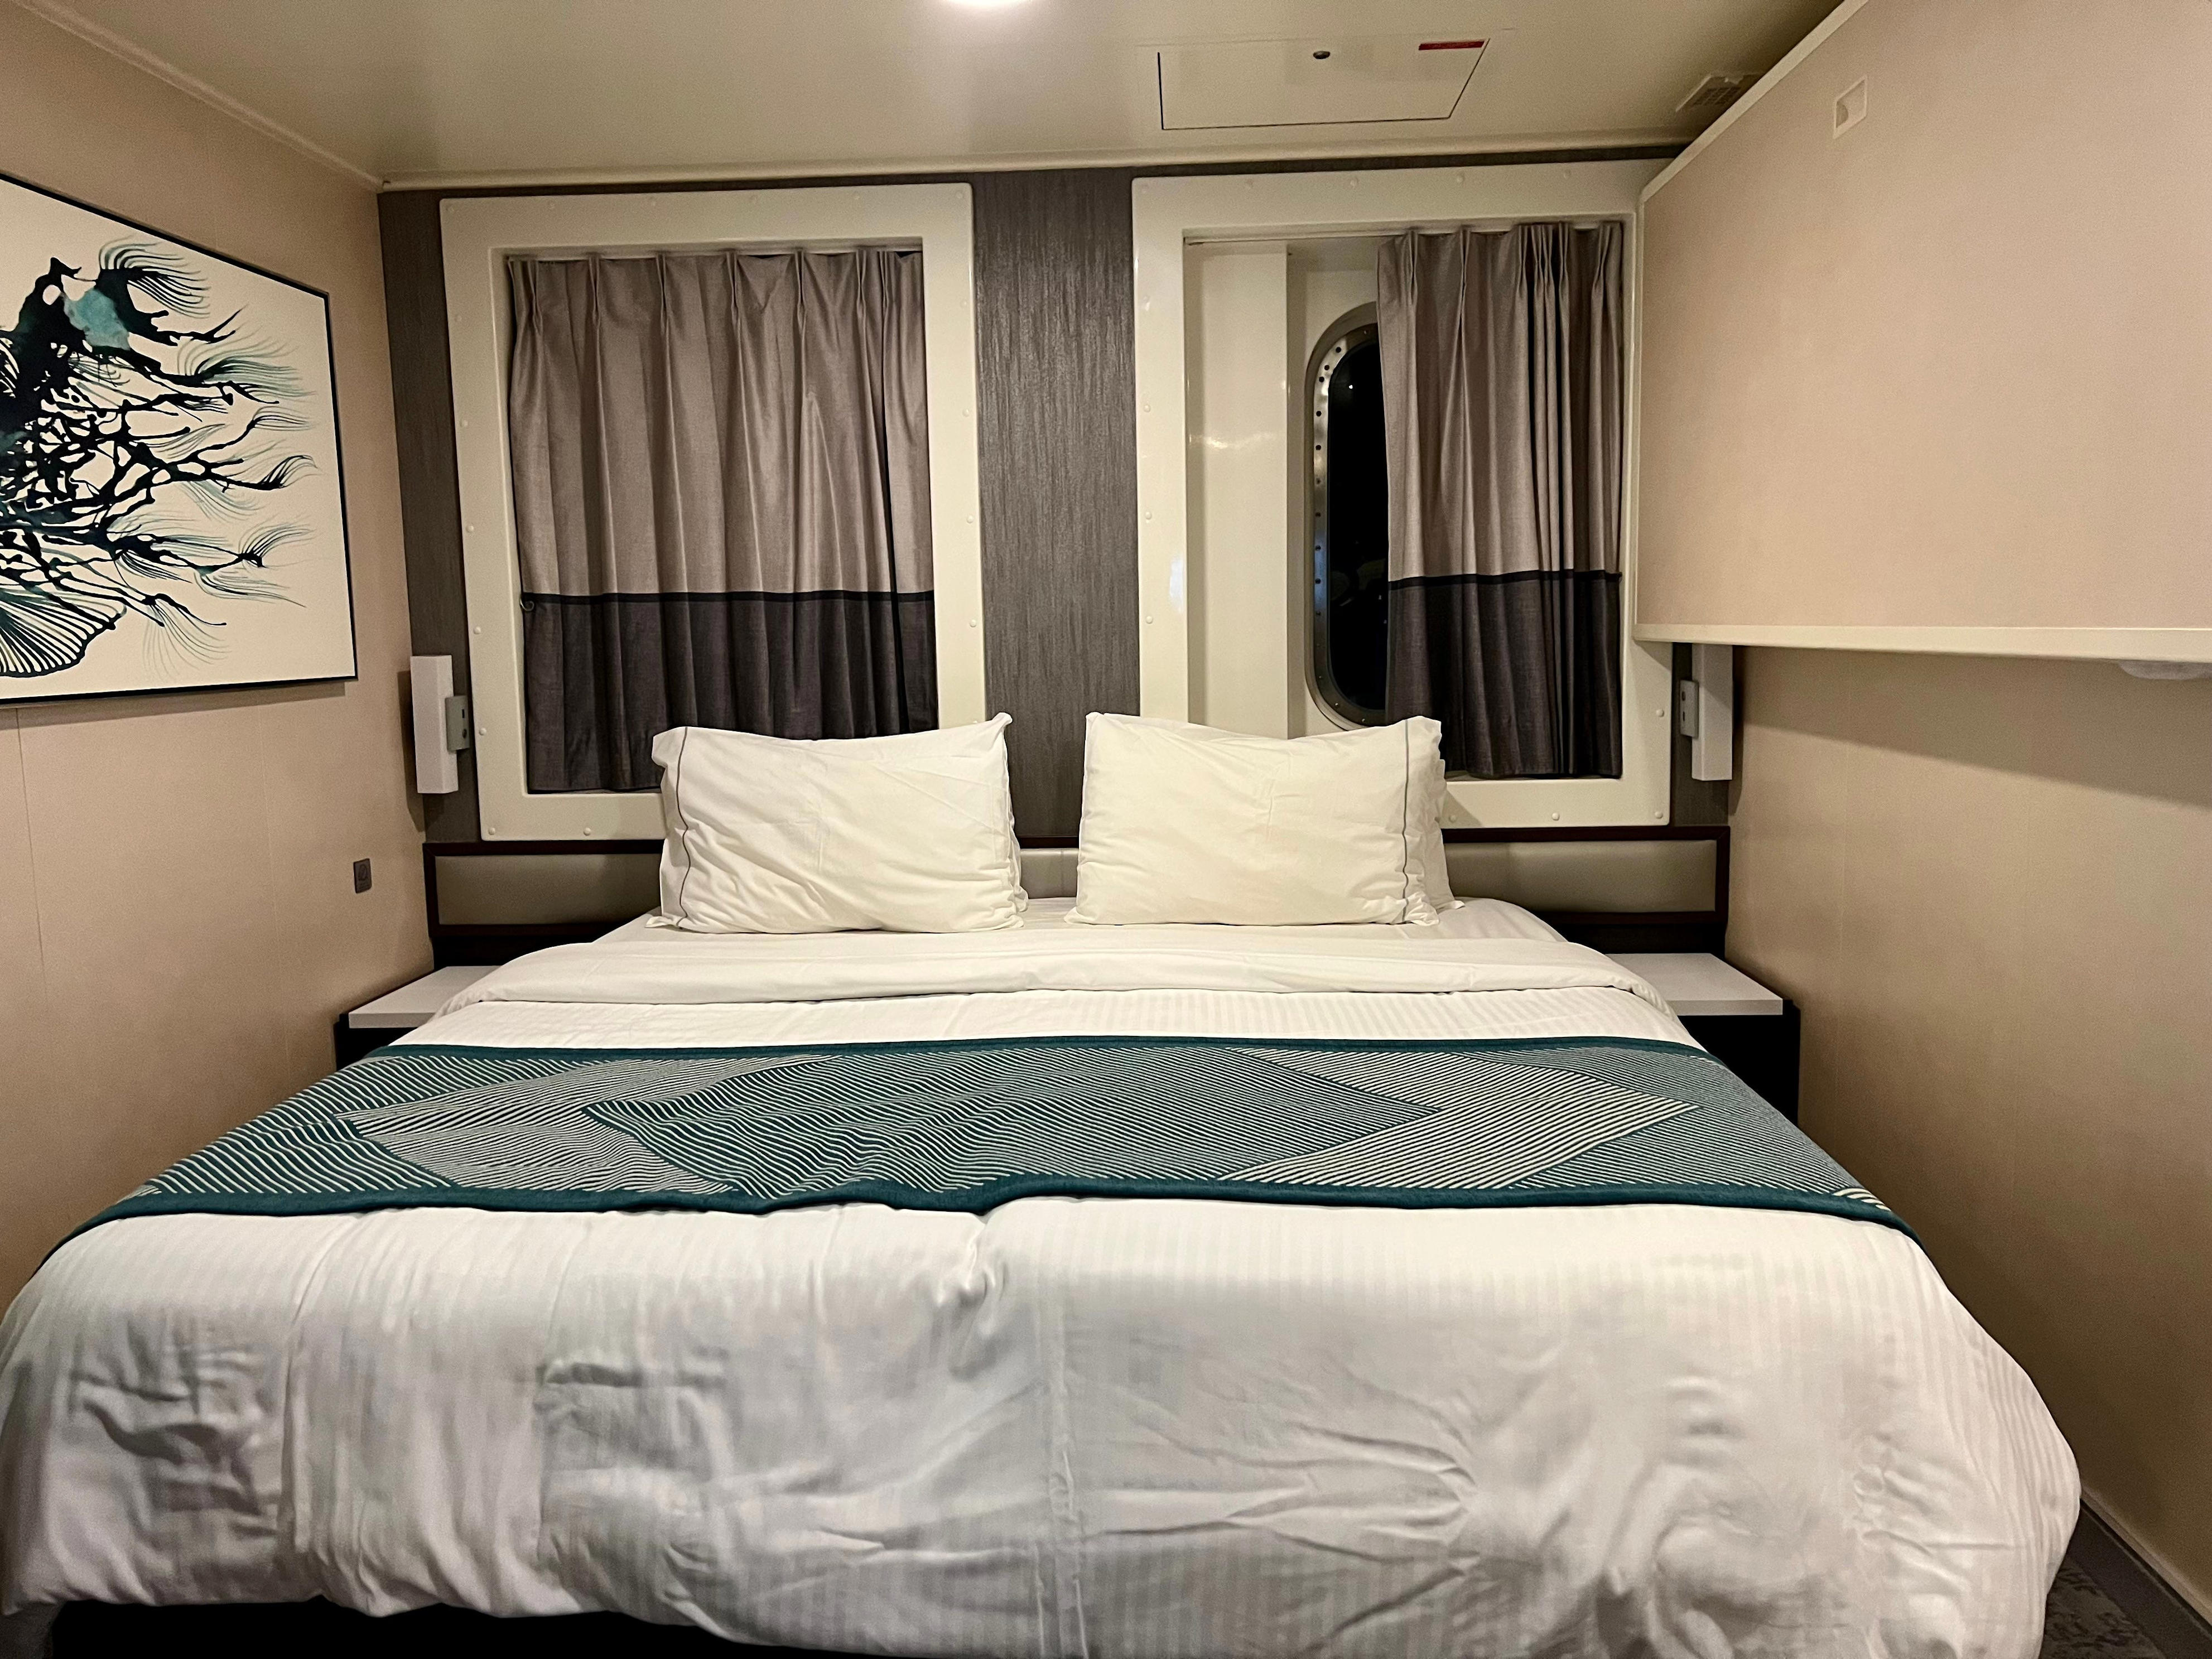 <p>Excursions and spa services are often nonrefundable, but it pays to speak up if things aren't right.</p><p>The key is to go to guest services on board as soon as there's an issue. I've learned passengers have more leverage to work things out while they're still on the ship.</p><p>I visited guest services several times this year, including when I took a Holland America Line excursion to Cartagena that didn't fit the description. I received a 50% refund for the excursion.</p><p>I also visited guest services when I sailed with Norwegian Cruise Line and the air conditioning broke in my cabin. I was able to move to another cabin for one night, and I received onboard credit.</p>